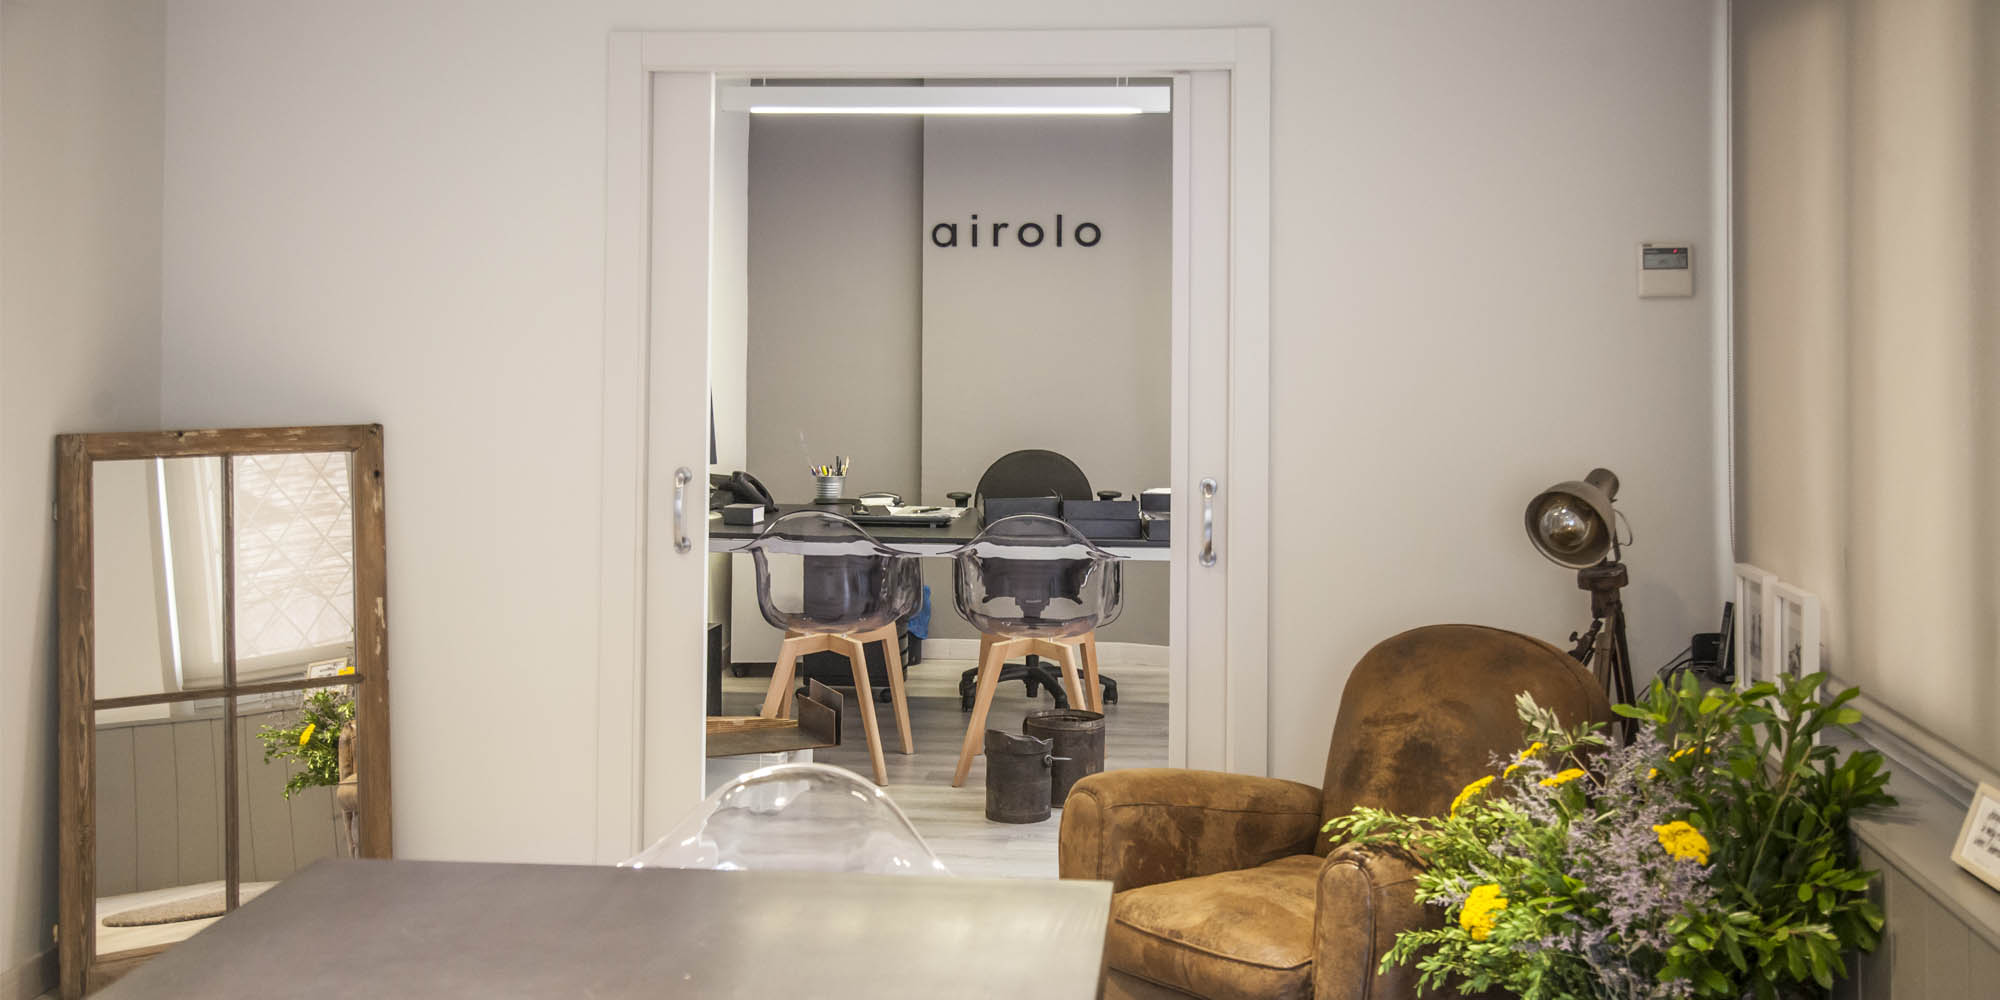 Thanks to our customers confidence, today Airolo is a well-positioned catering sector